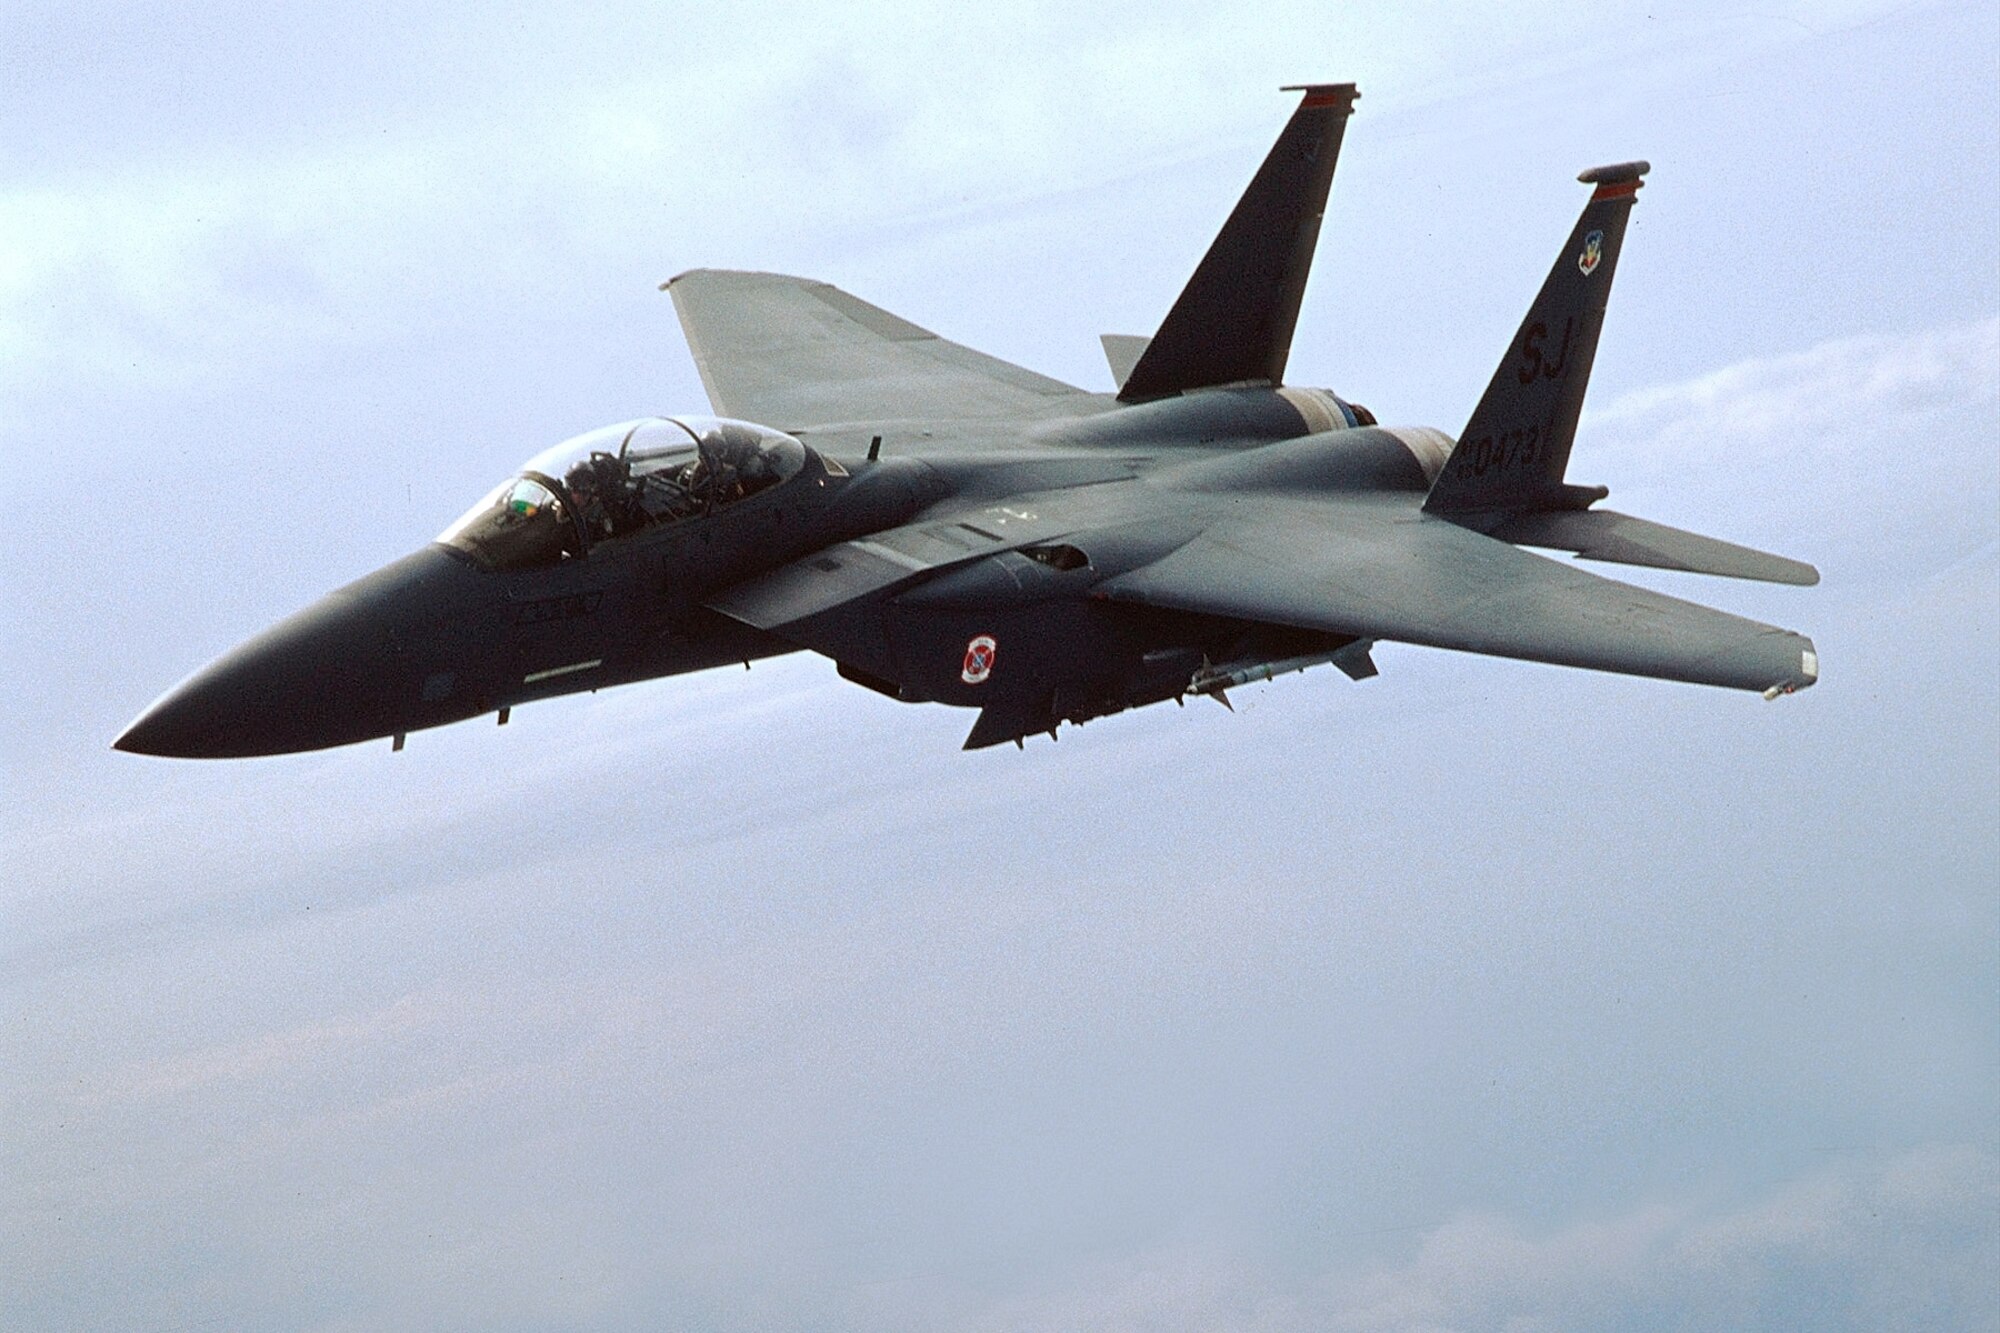 FILE PHOTO -- An F-15E Strike Eagle from the 4th Fighter Wing, Seymour Johmson Air Force Base, N.C.  (U.S. Air Force photo by Master Sgt. Thomas Meneguin)